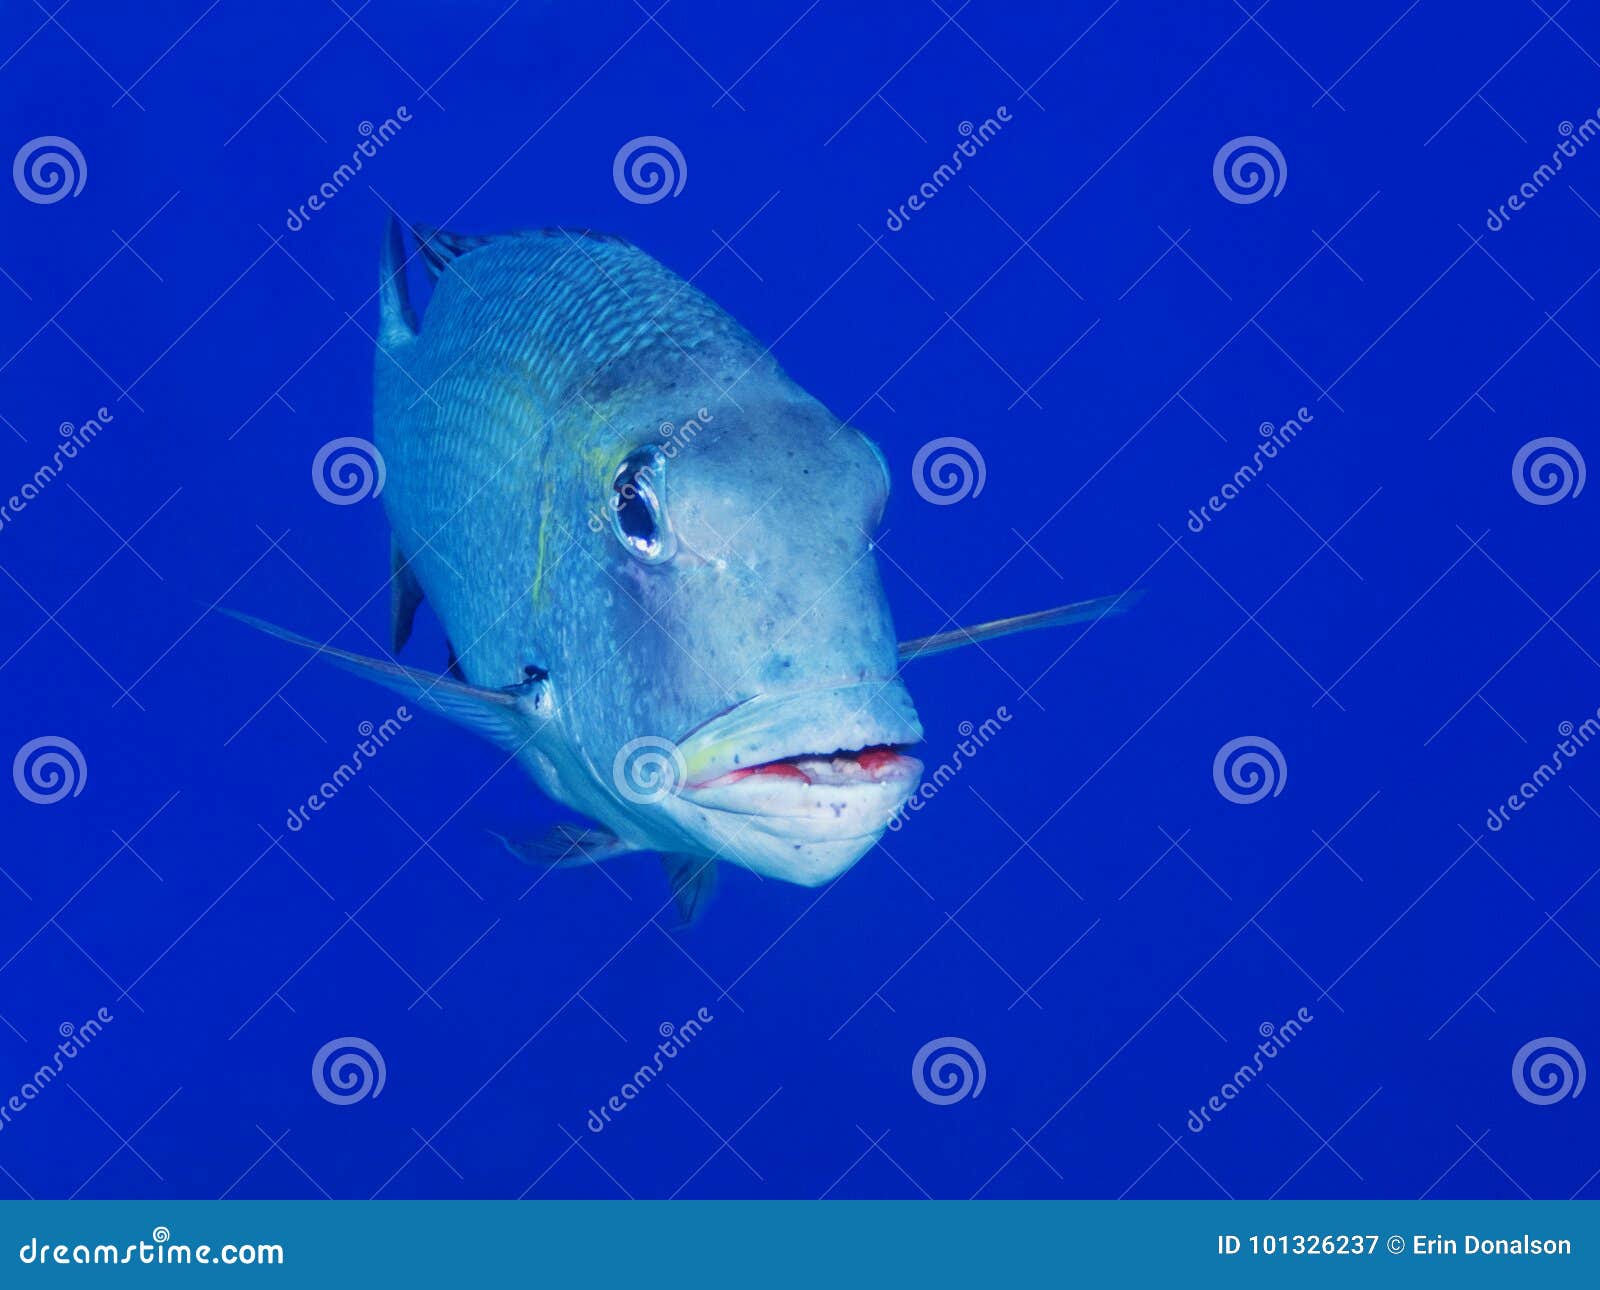 Download Trevally Caranx Fish Close Up In Blue Ocean Water Stock ...